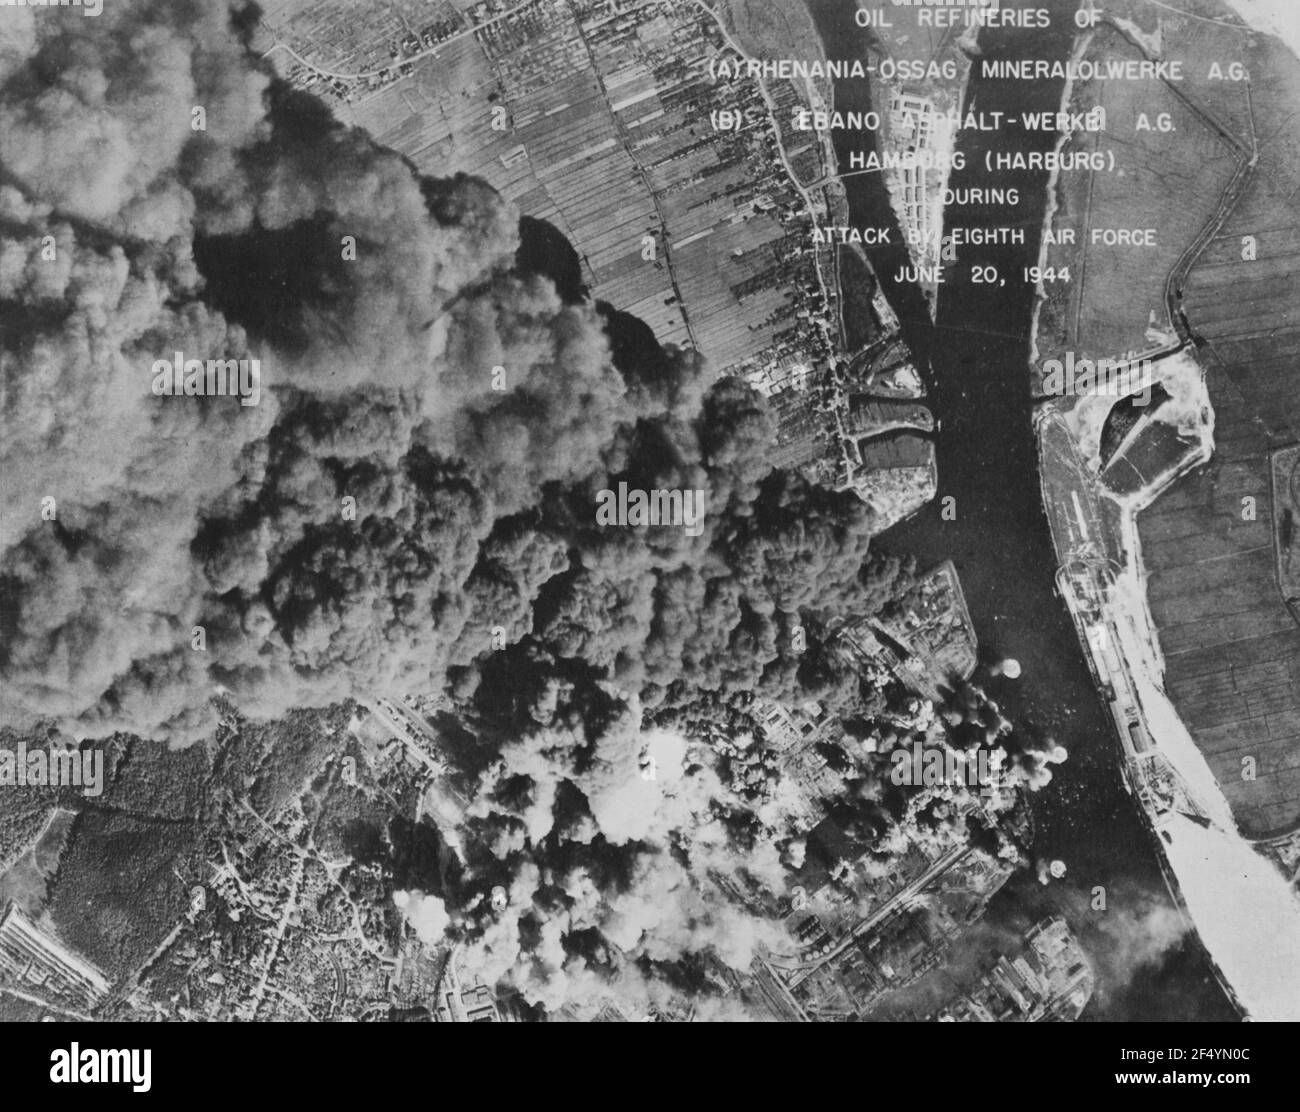 Oil refineries of (A) Rhenania-Ossag Mineralolwerke A.G. and (B) Ebano Asphalt-Werke A.G., Hamburg, Germany, during bombing by 8th Air Force 20 June 1944. 303nd Bomb Group Stock Photo